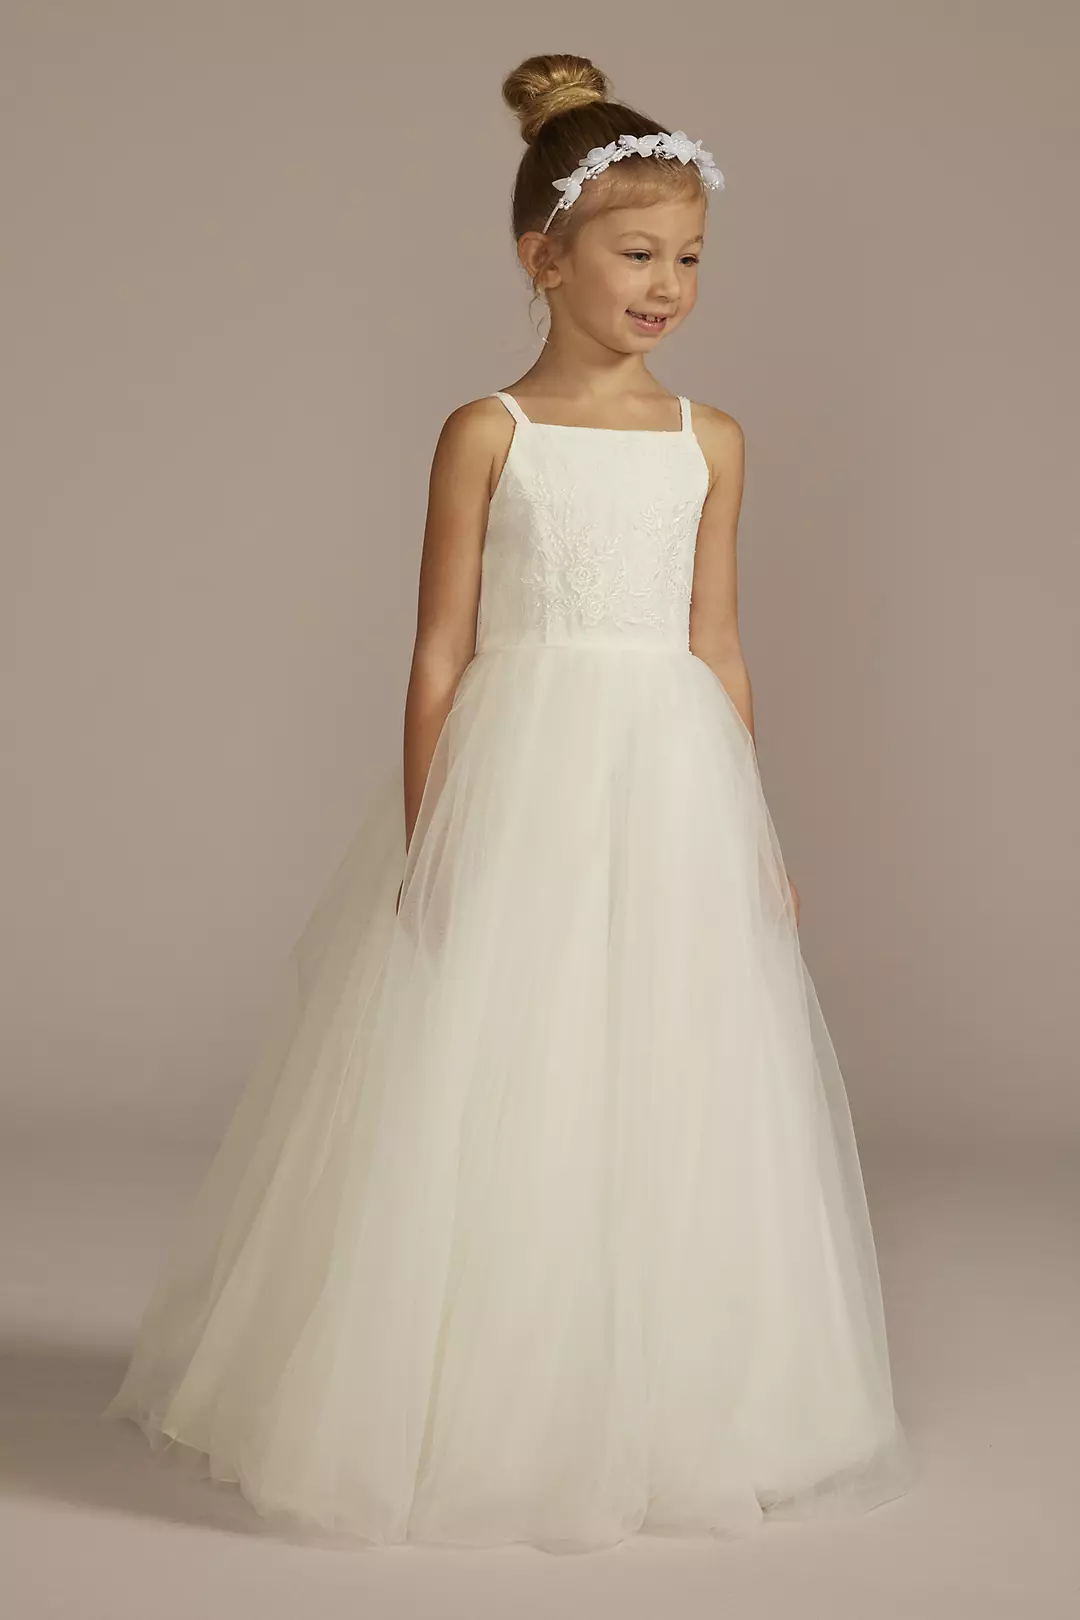 Beaded Lace and Tulle Flower Girl Ball Gown Dress Image